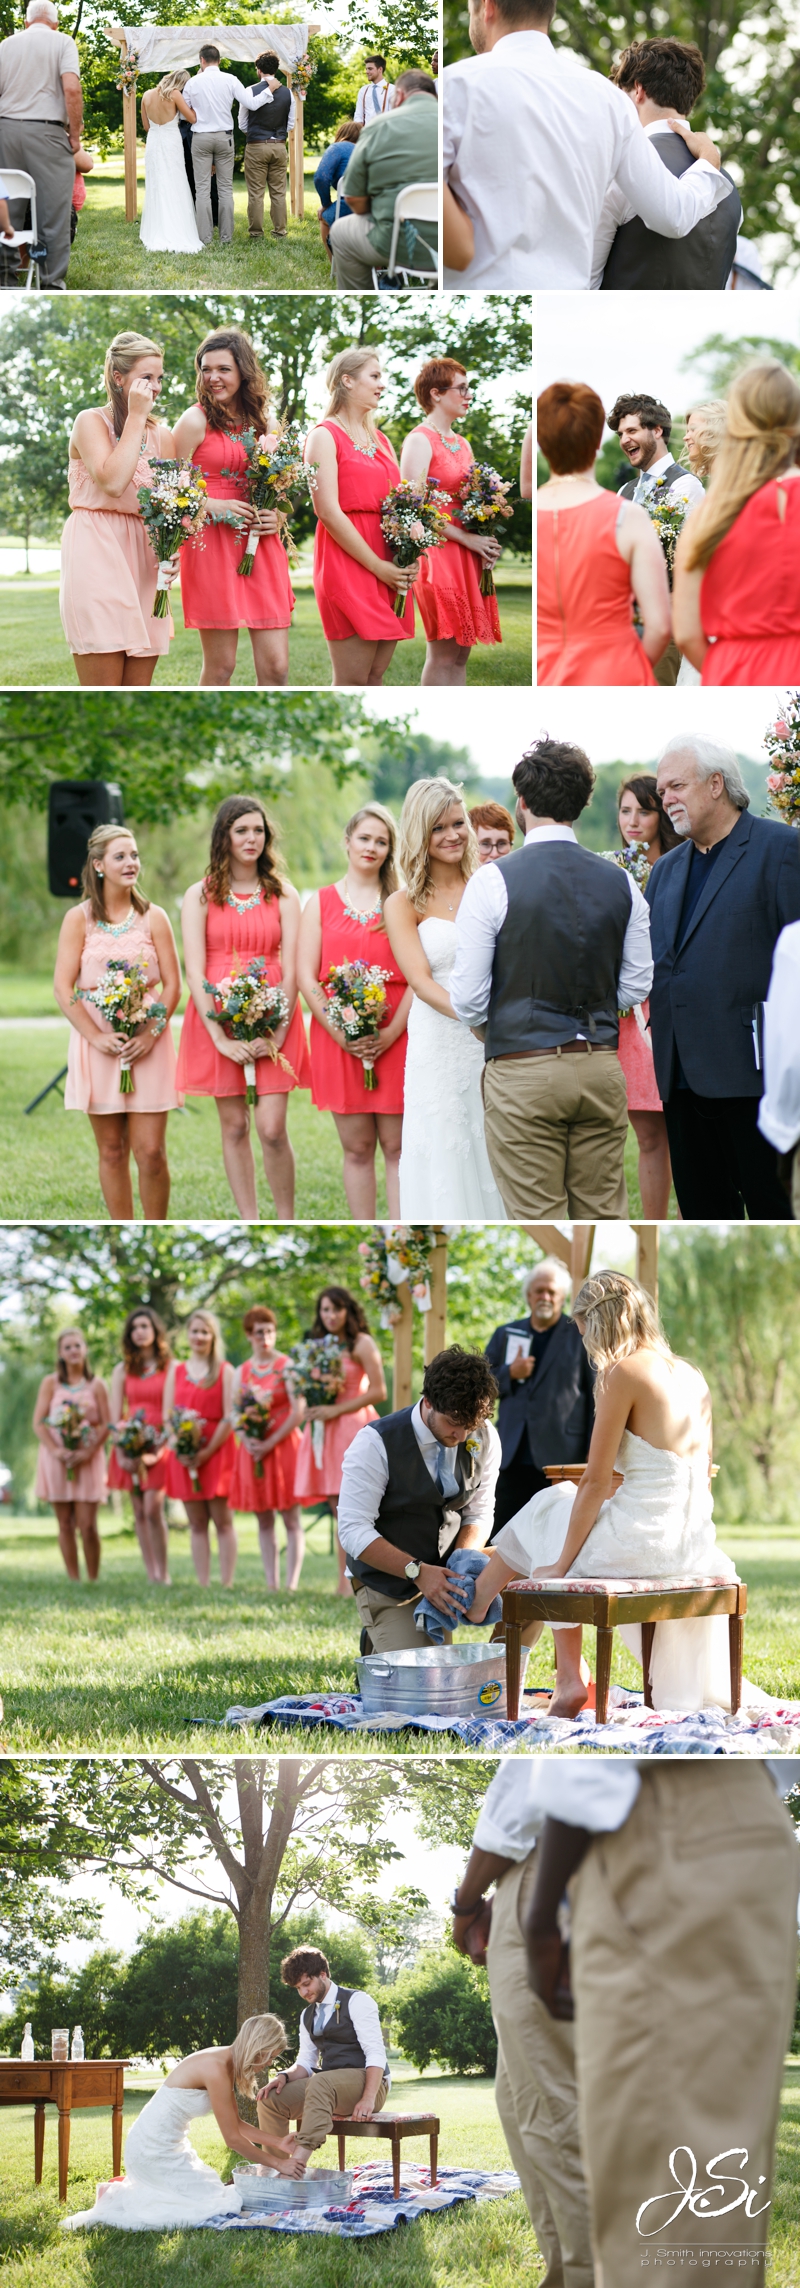 Kansas City Cider Hill Orchard rustic outdoor wedding ceremony photo